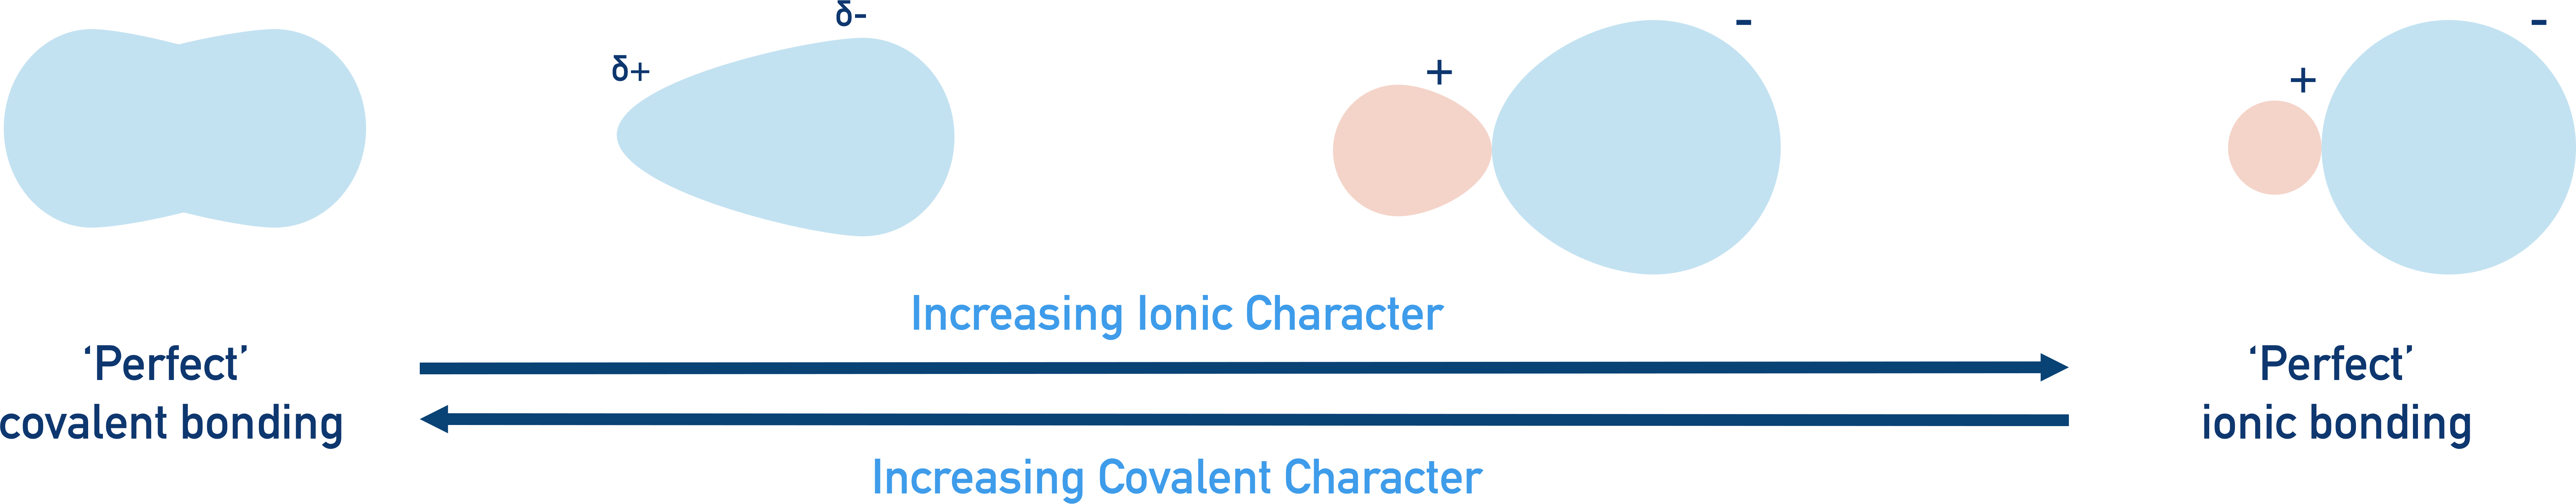 covalent and ionic character bonding perfect covalent perfect ionic